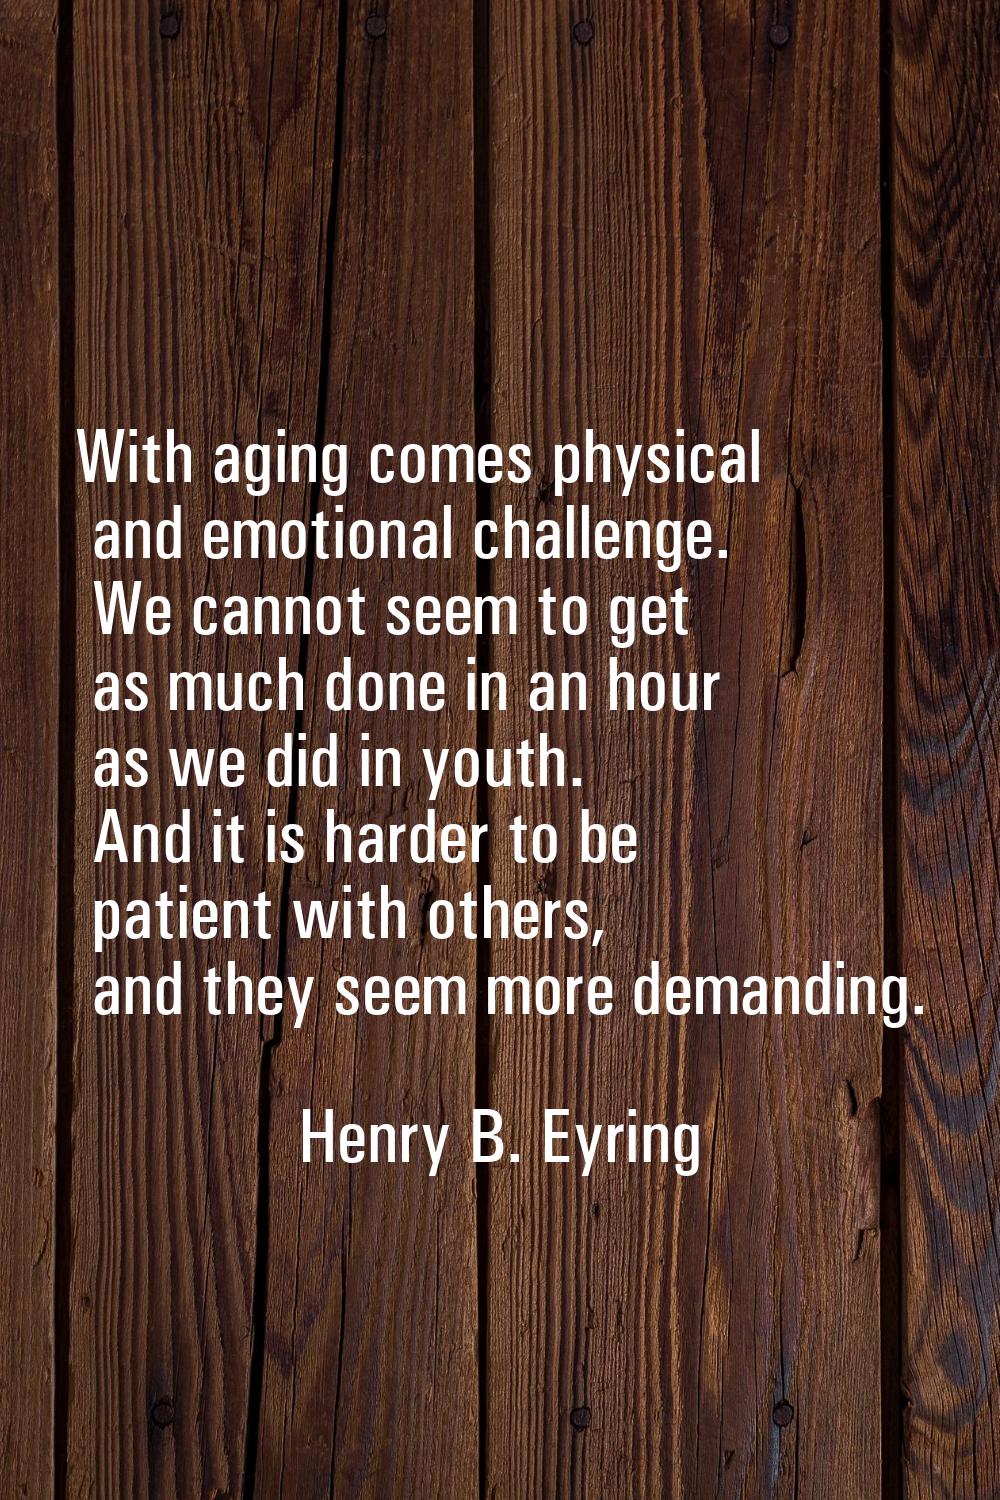 With aging comes physical and emotional challenge. We cannot seem to get as much done in an hour as